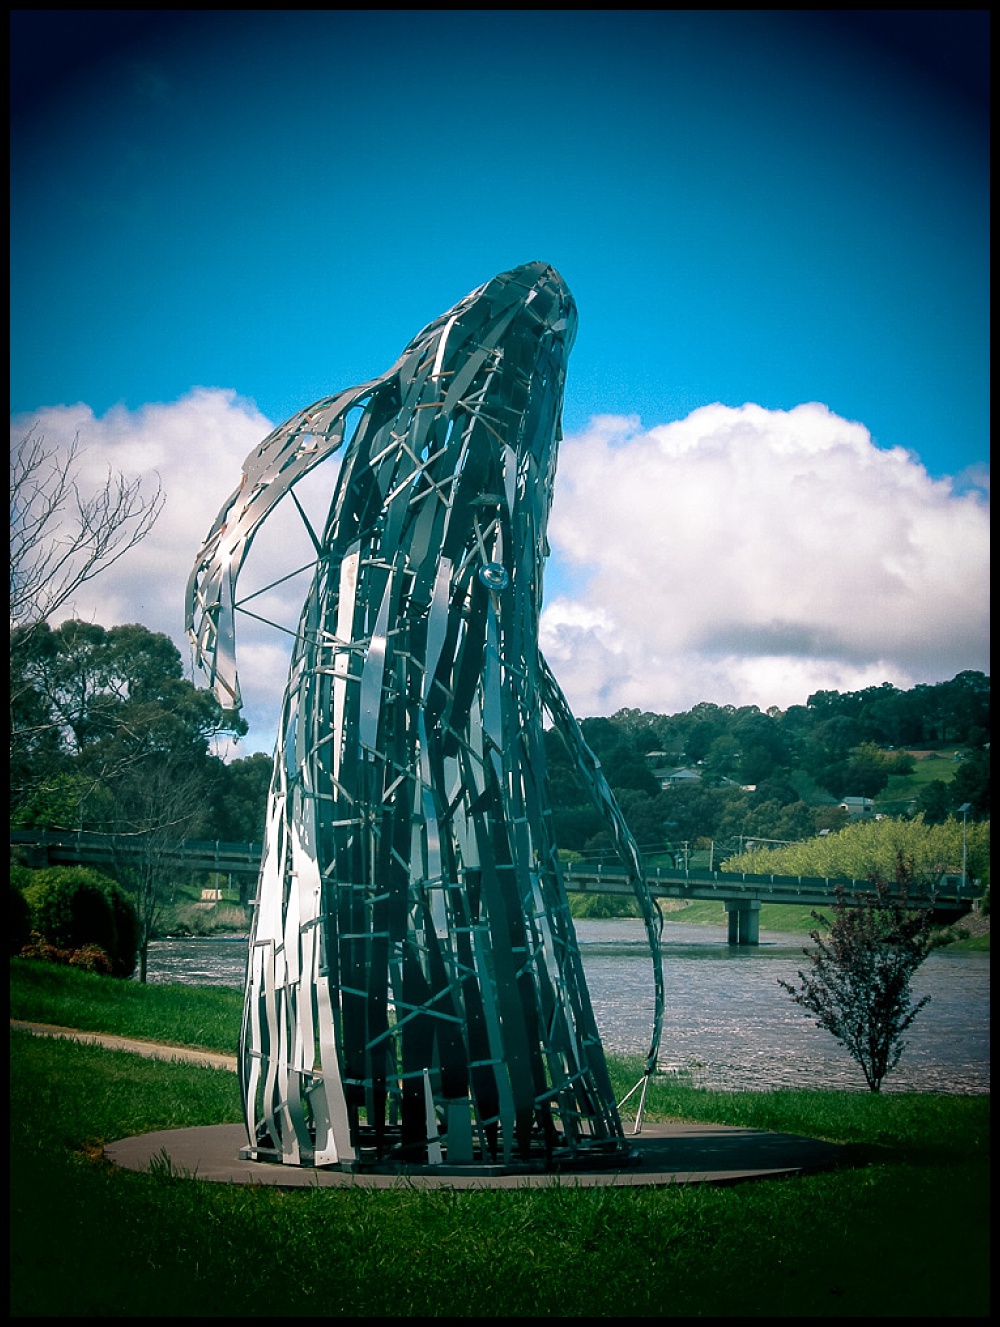 Walcha whale sculpture with toy camera setting